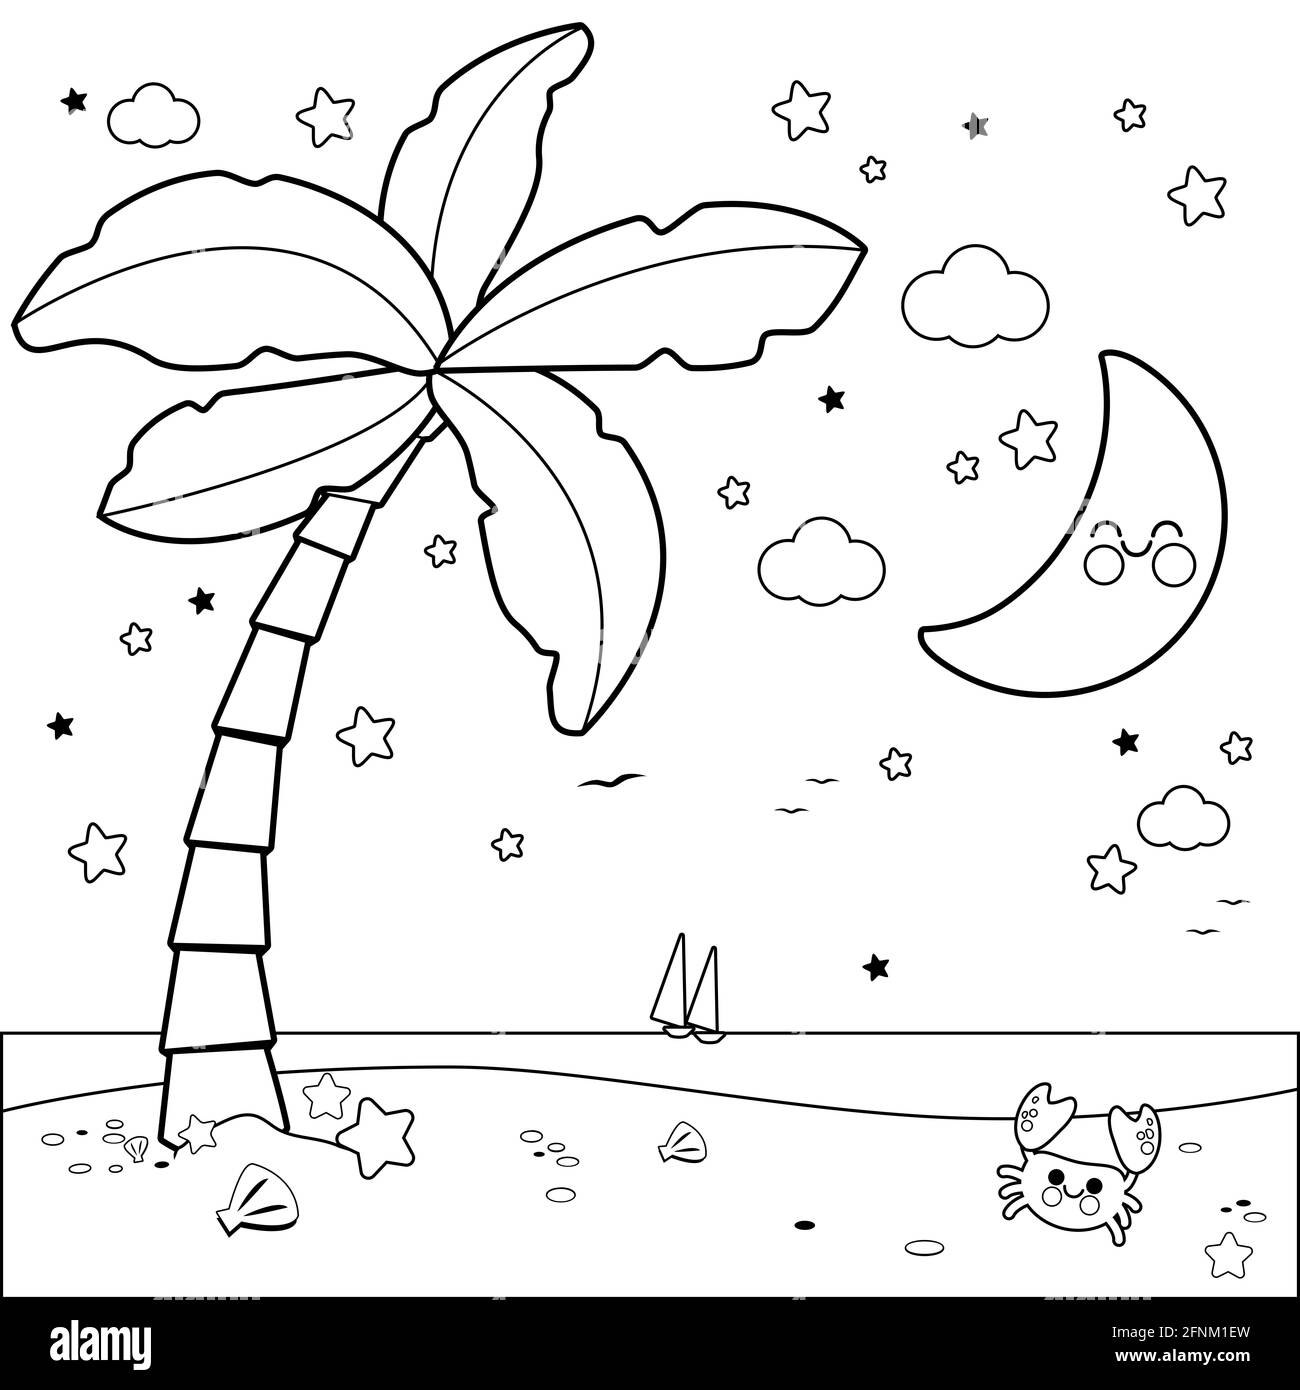 Tropical beach with palm tree at night. Black and white coloring book page. Stock Photo